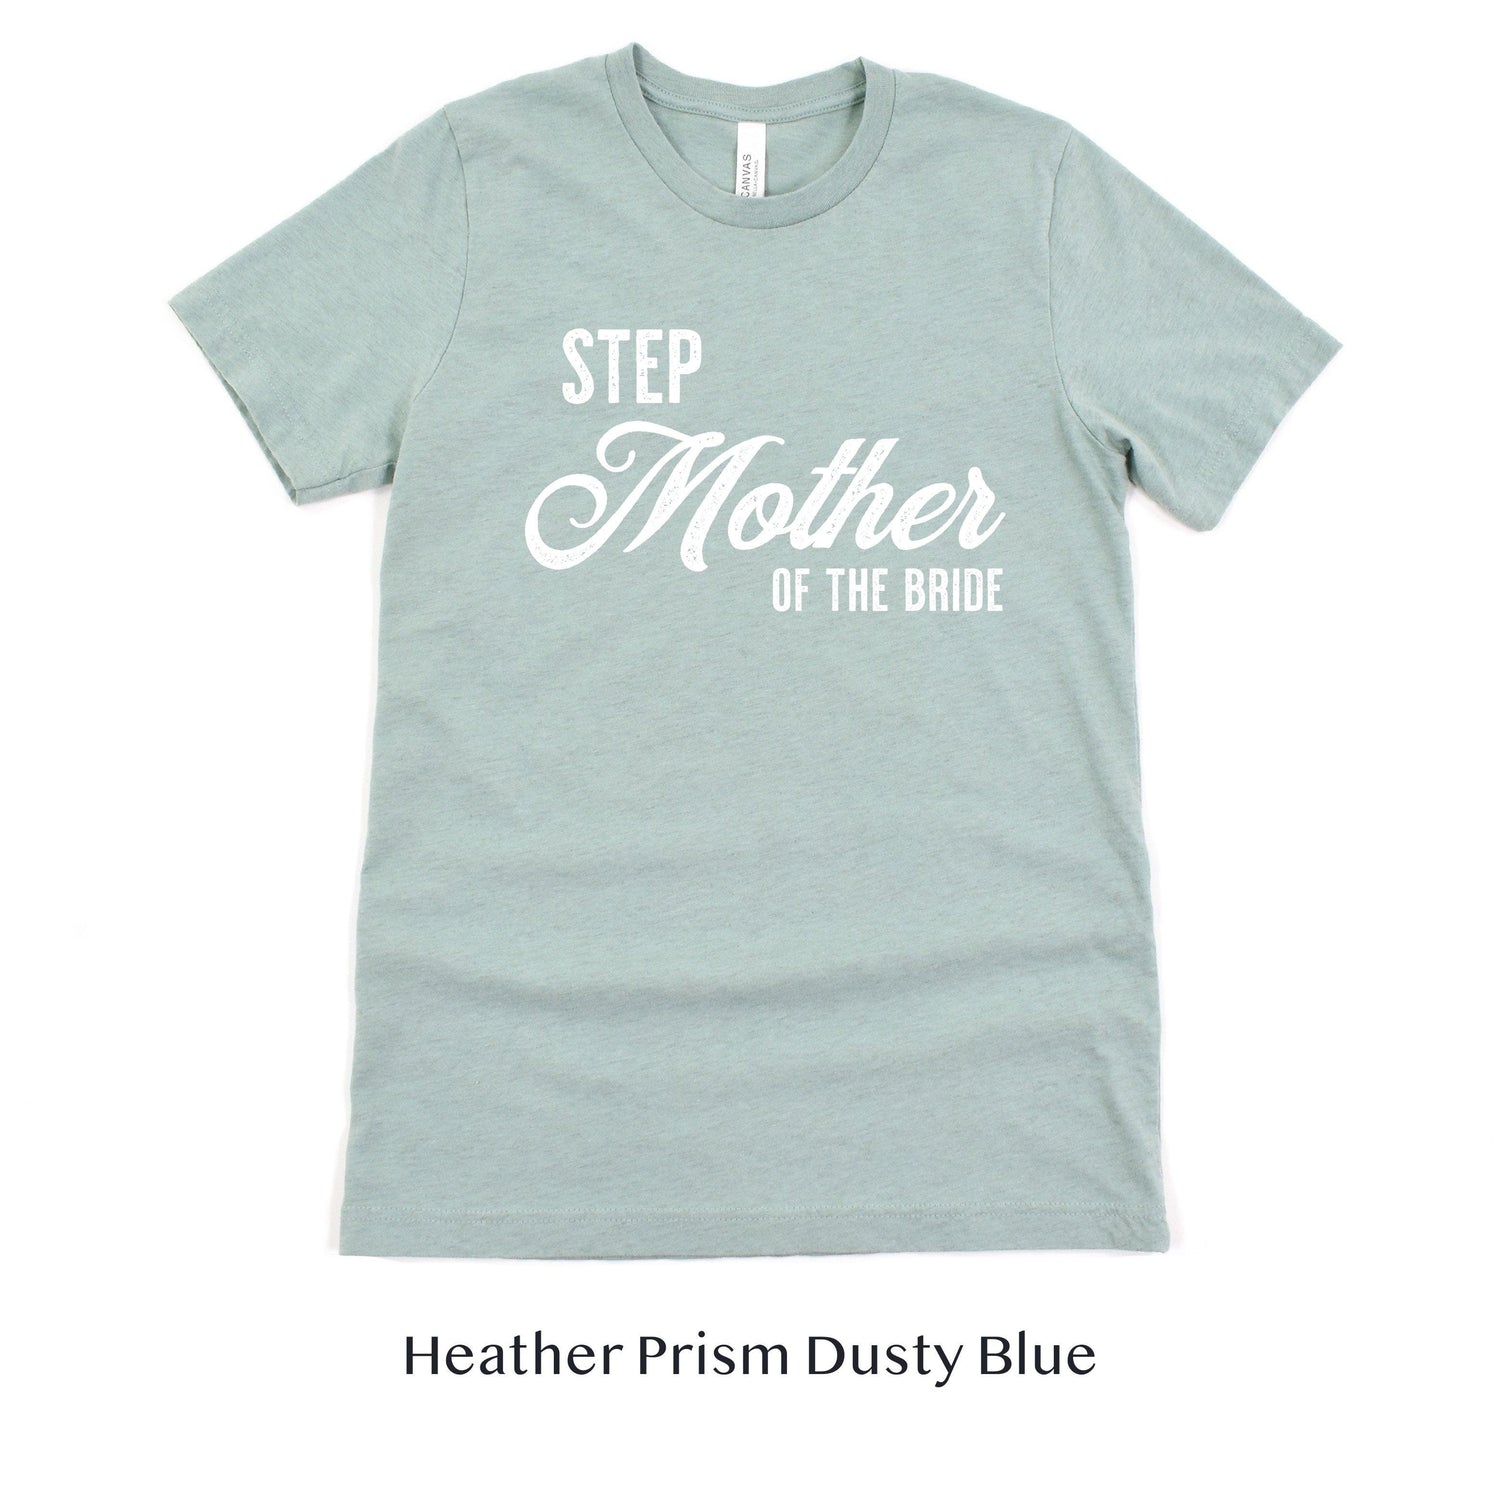 Step Mother of the Bride - Vintage Romance Wedding Party Unisex t-shirt by Oaklynn Lane